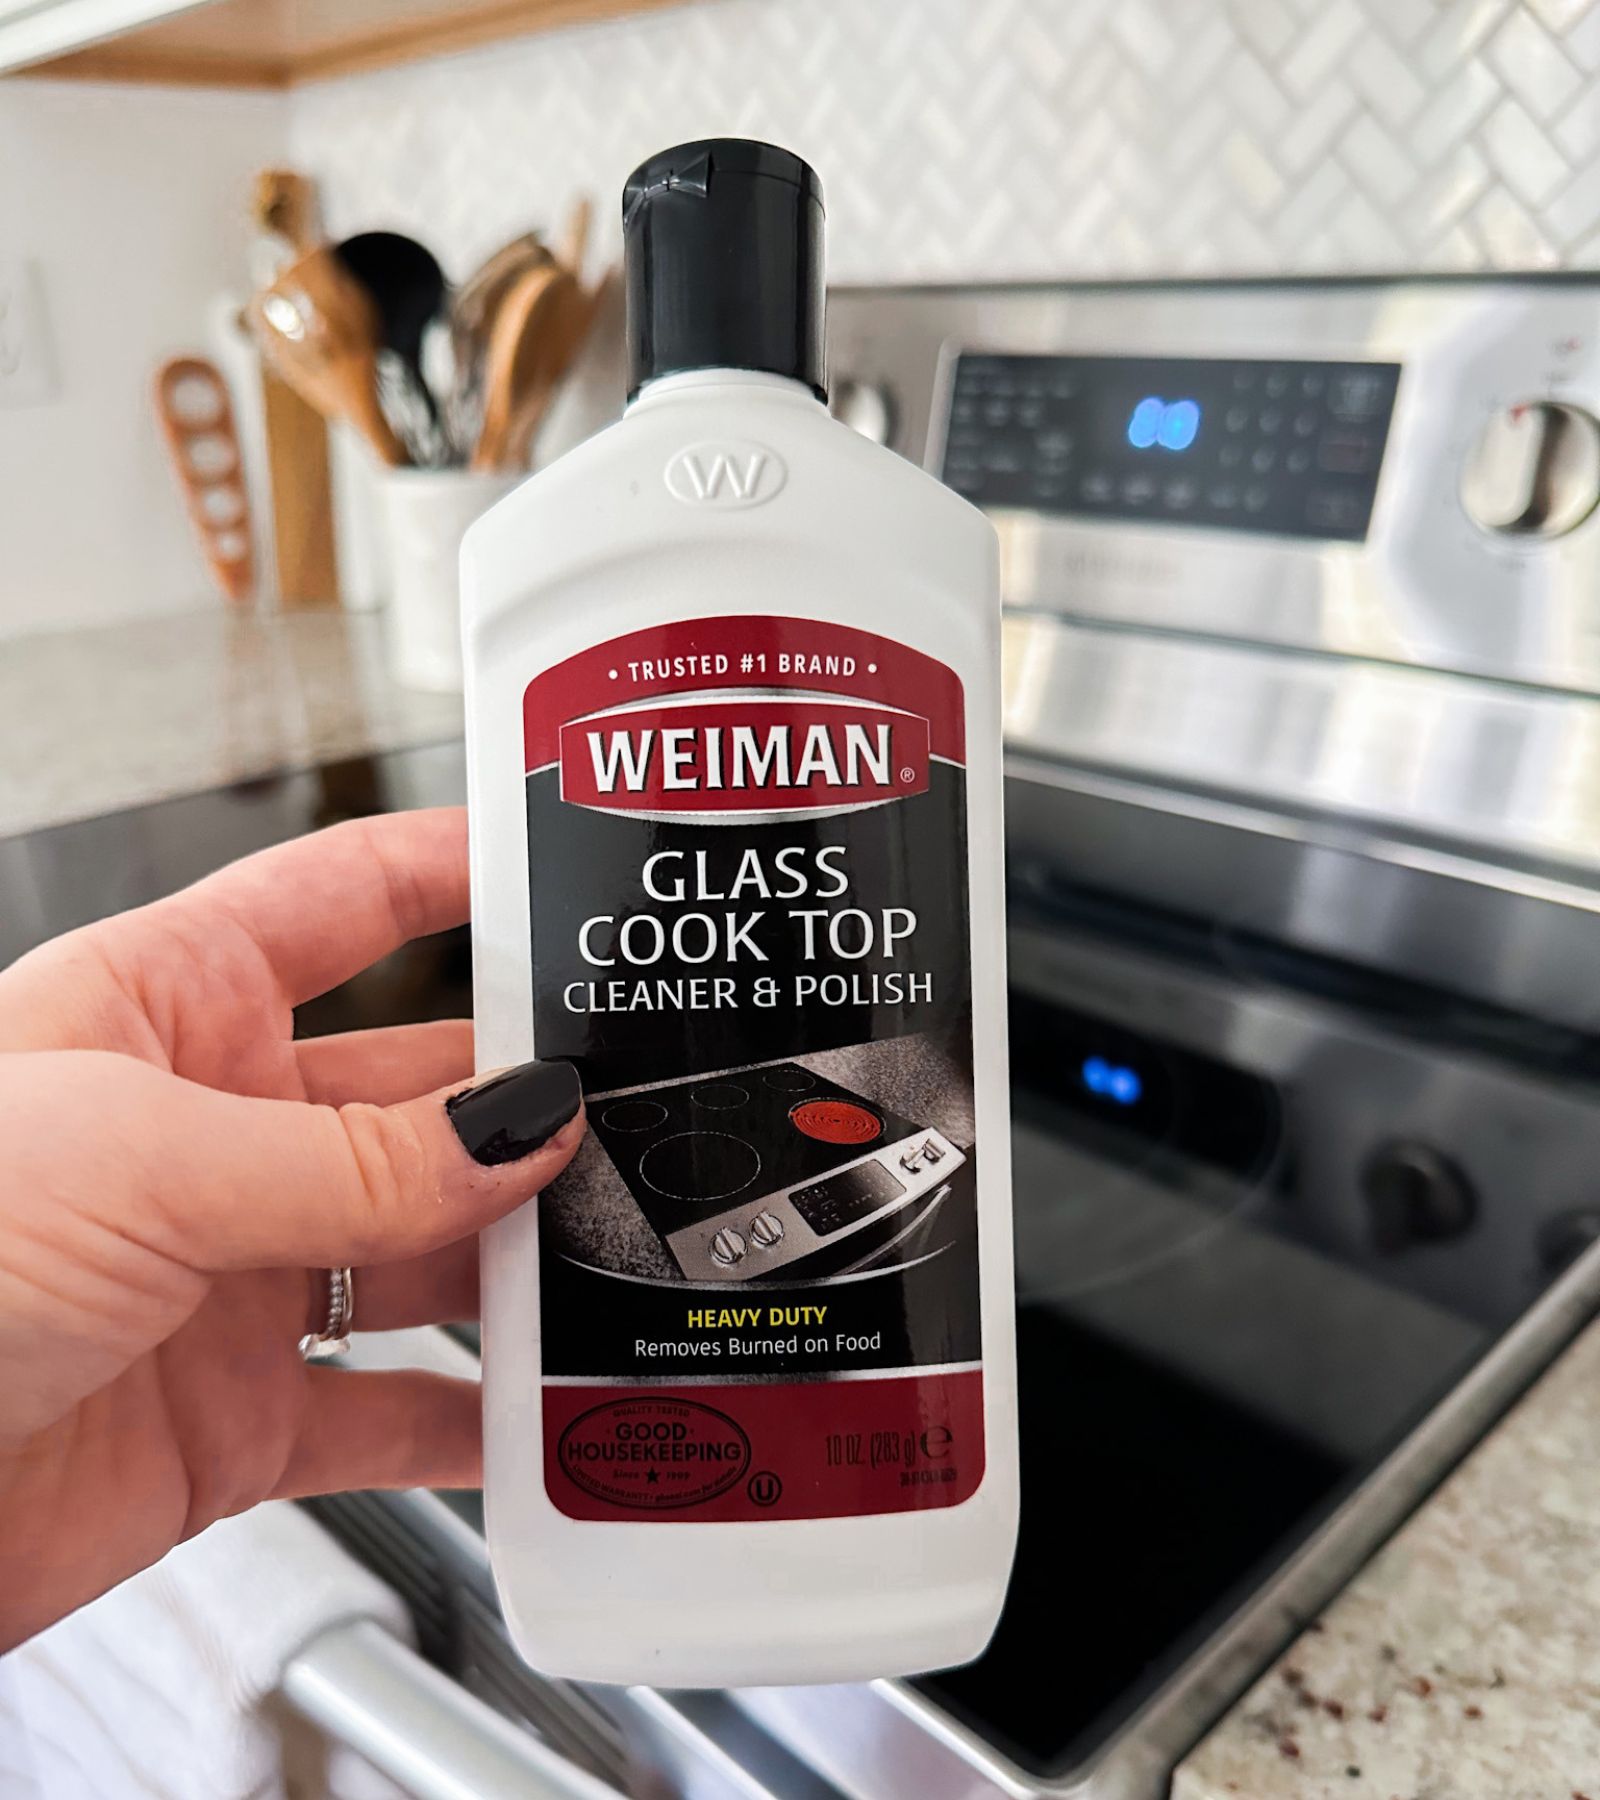  Weiman Cooktop and Stove Top Cleaner Kit - Glass Cook